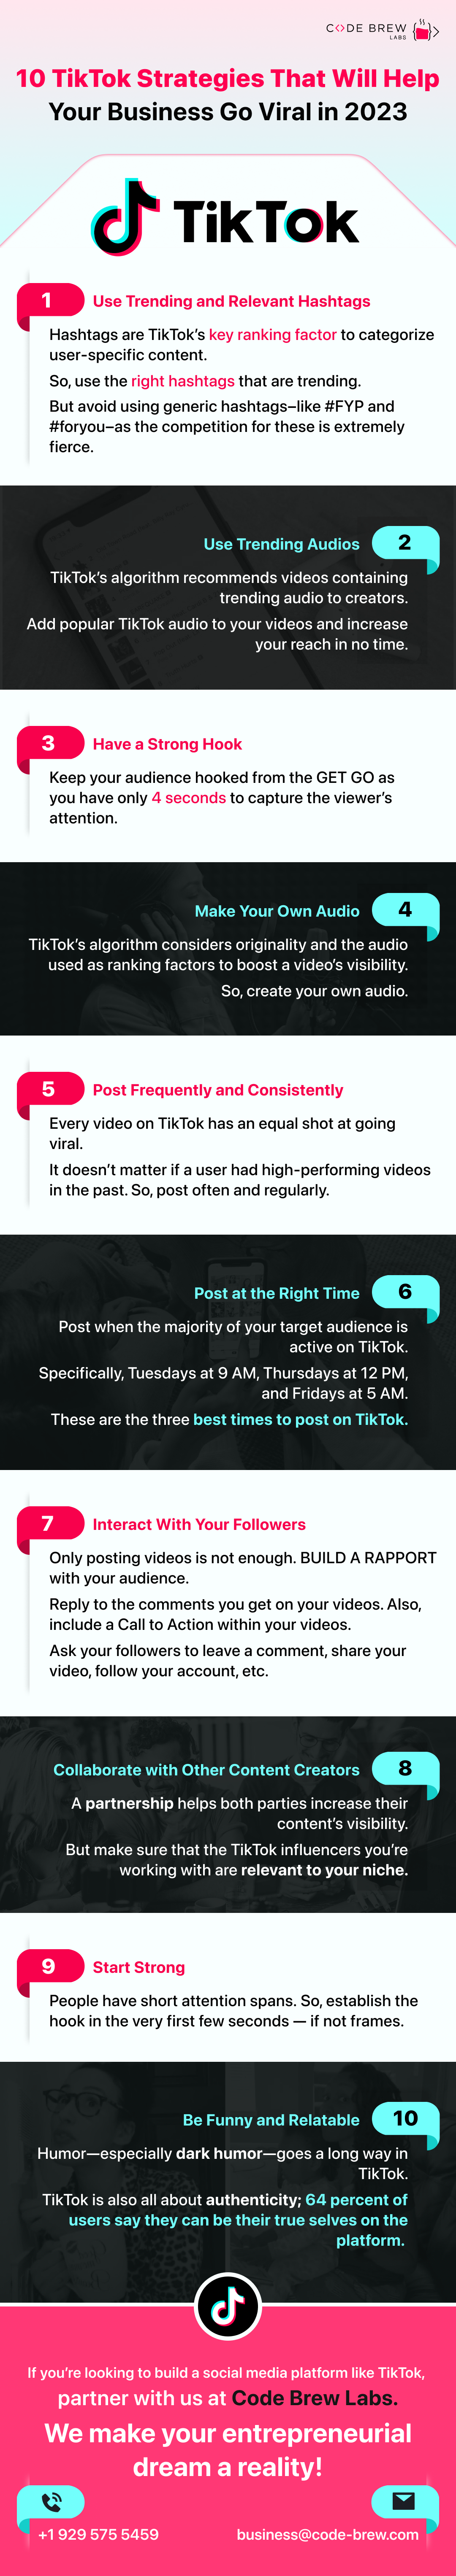 TikTok Strategies That Will Help Your Business Go Viral in 2023